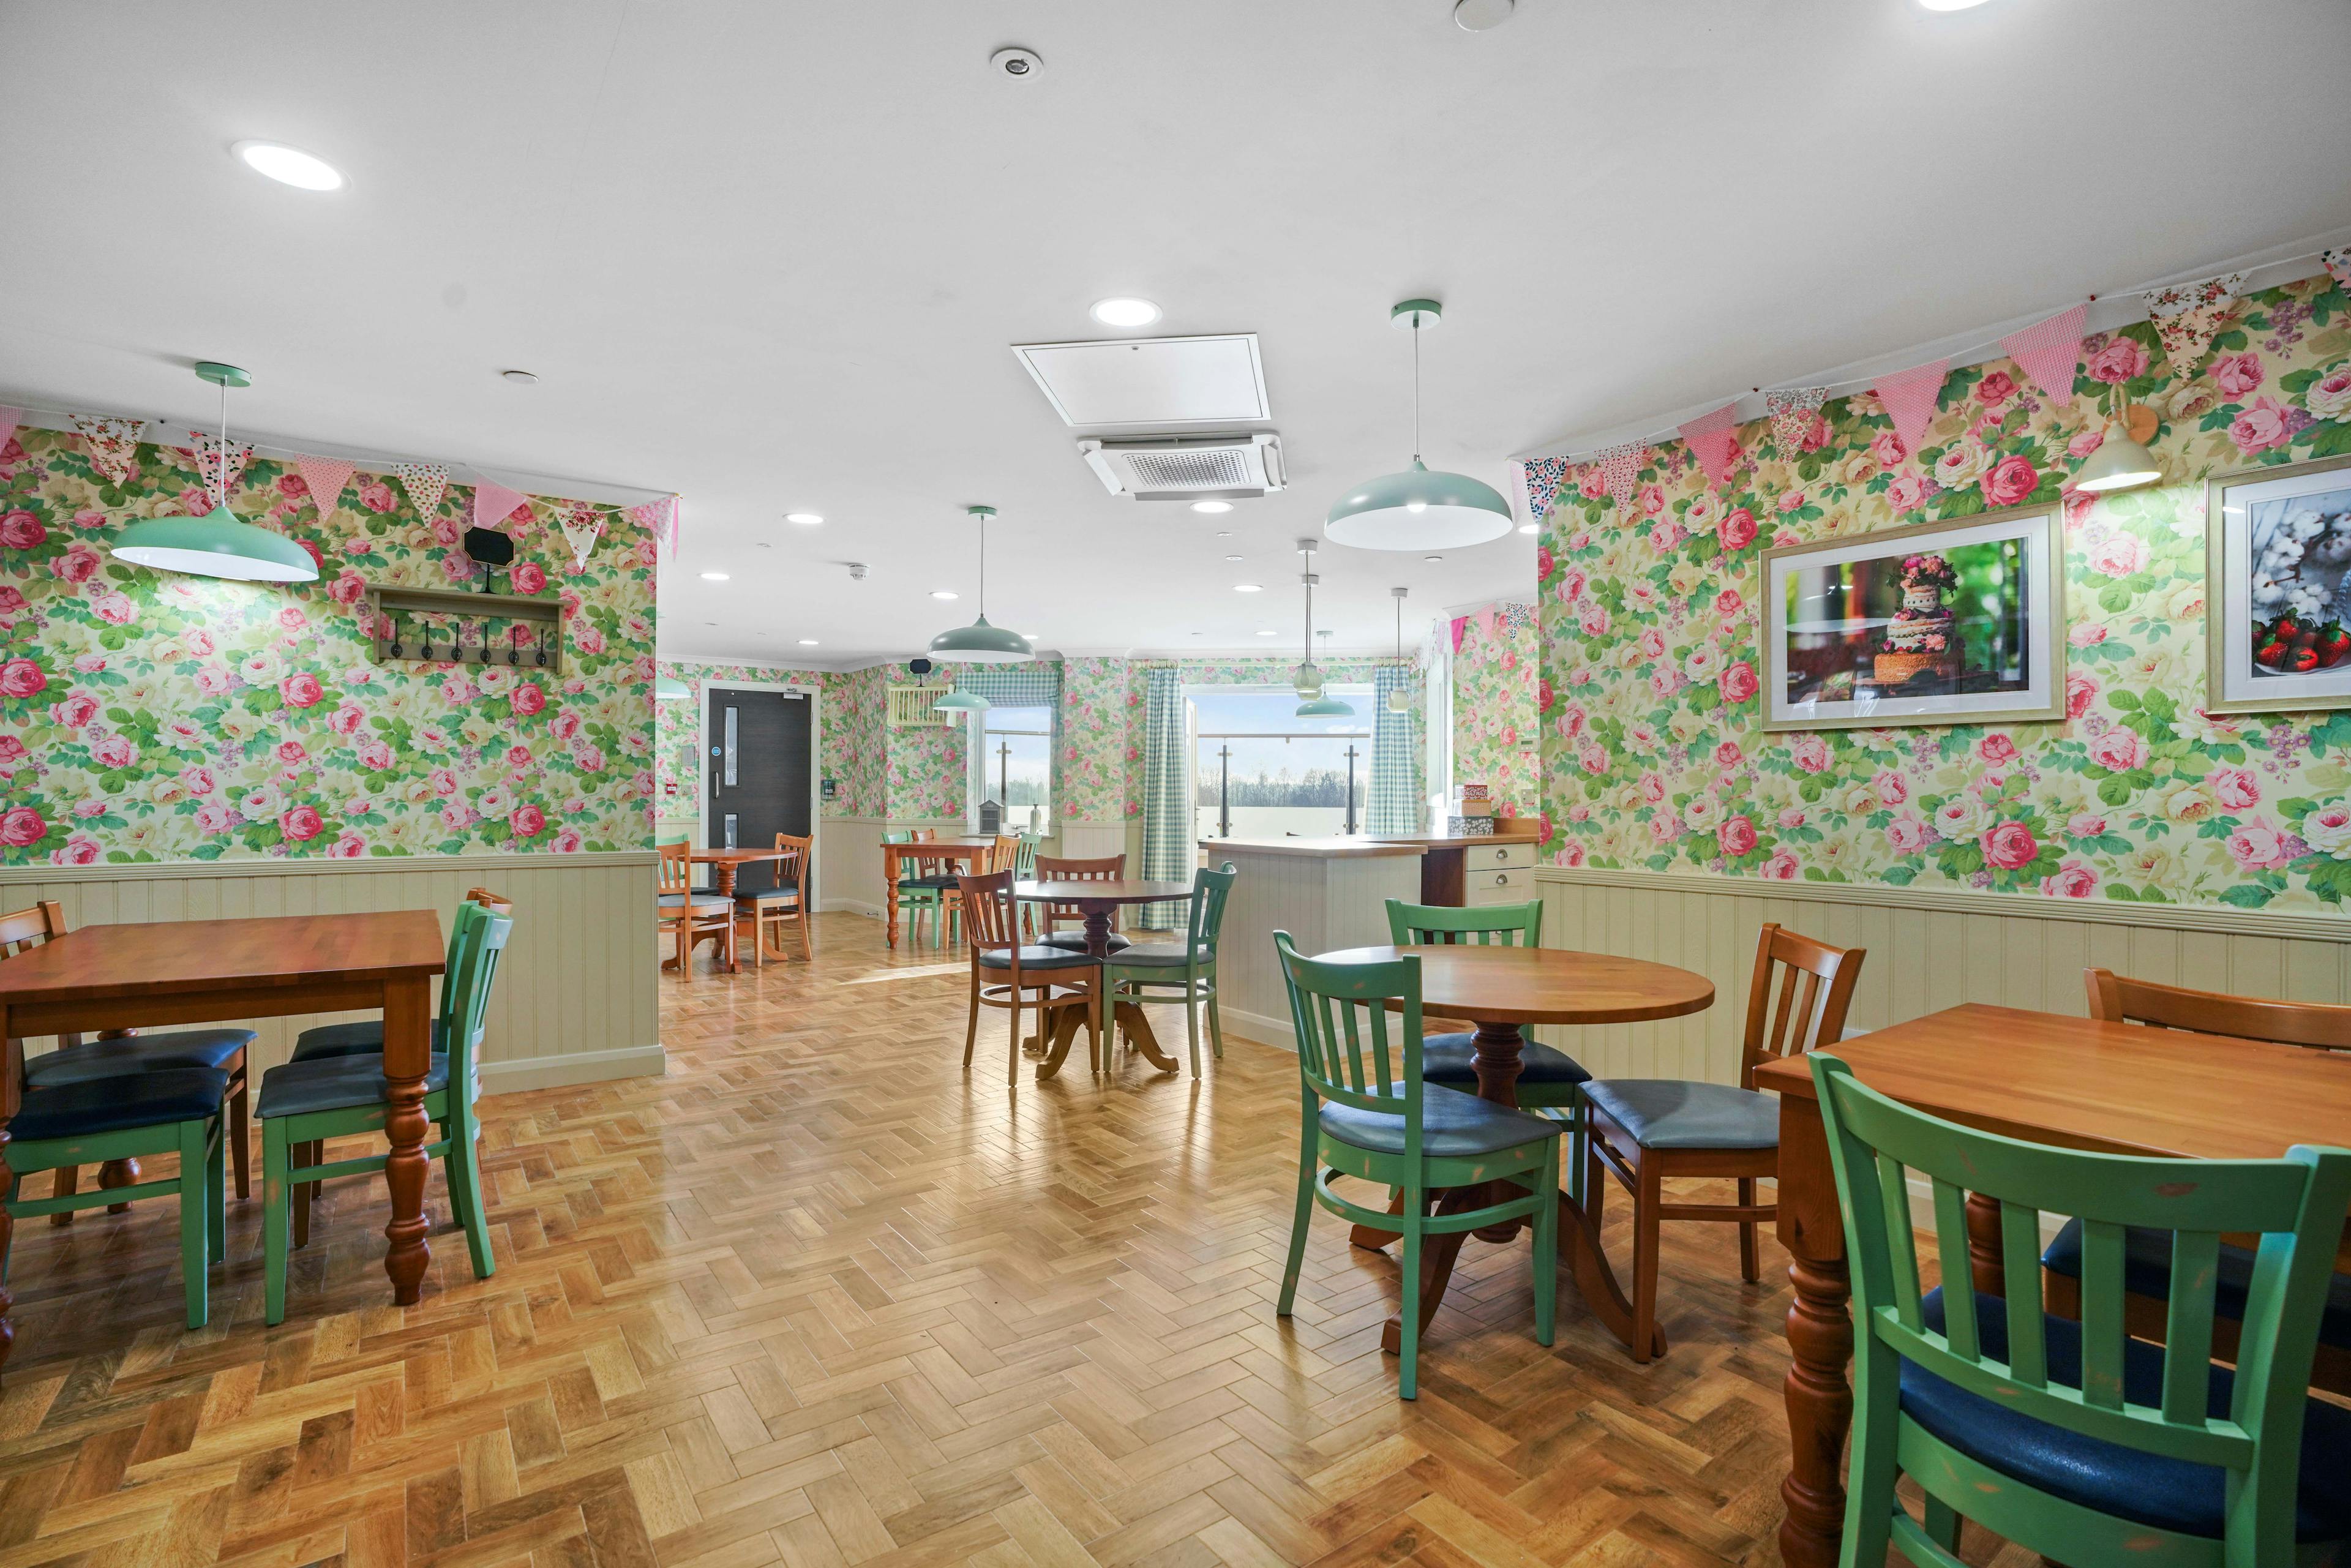 Dining area of Toray Pines care home in Woodhall Spa, Lincolnshire